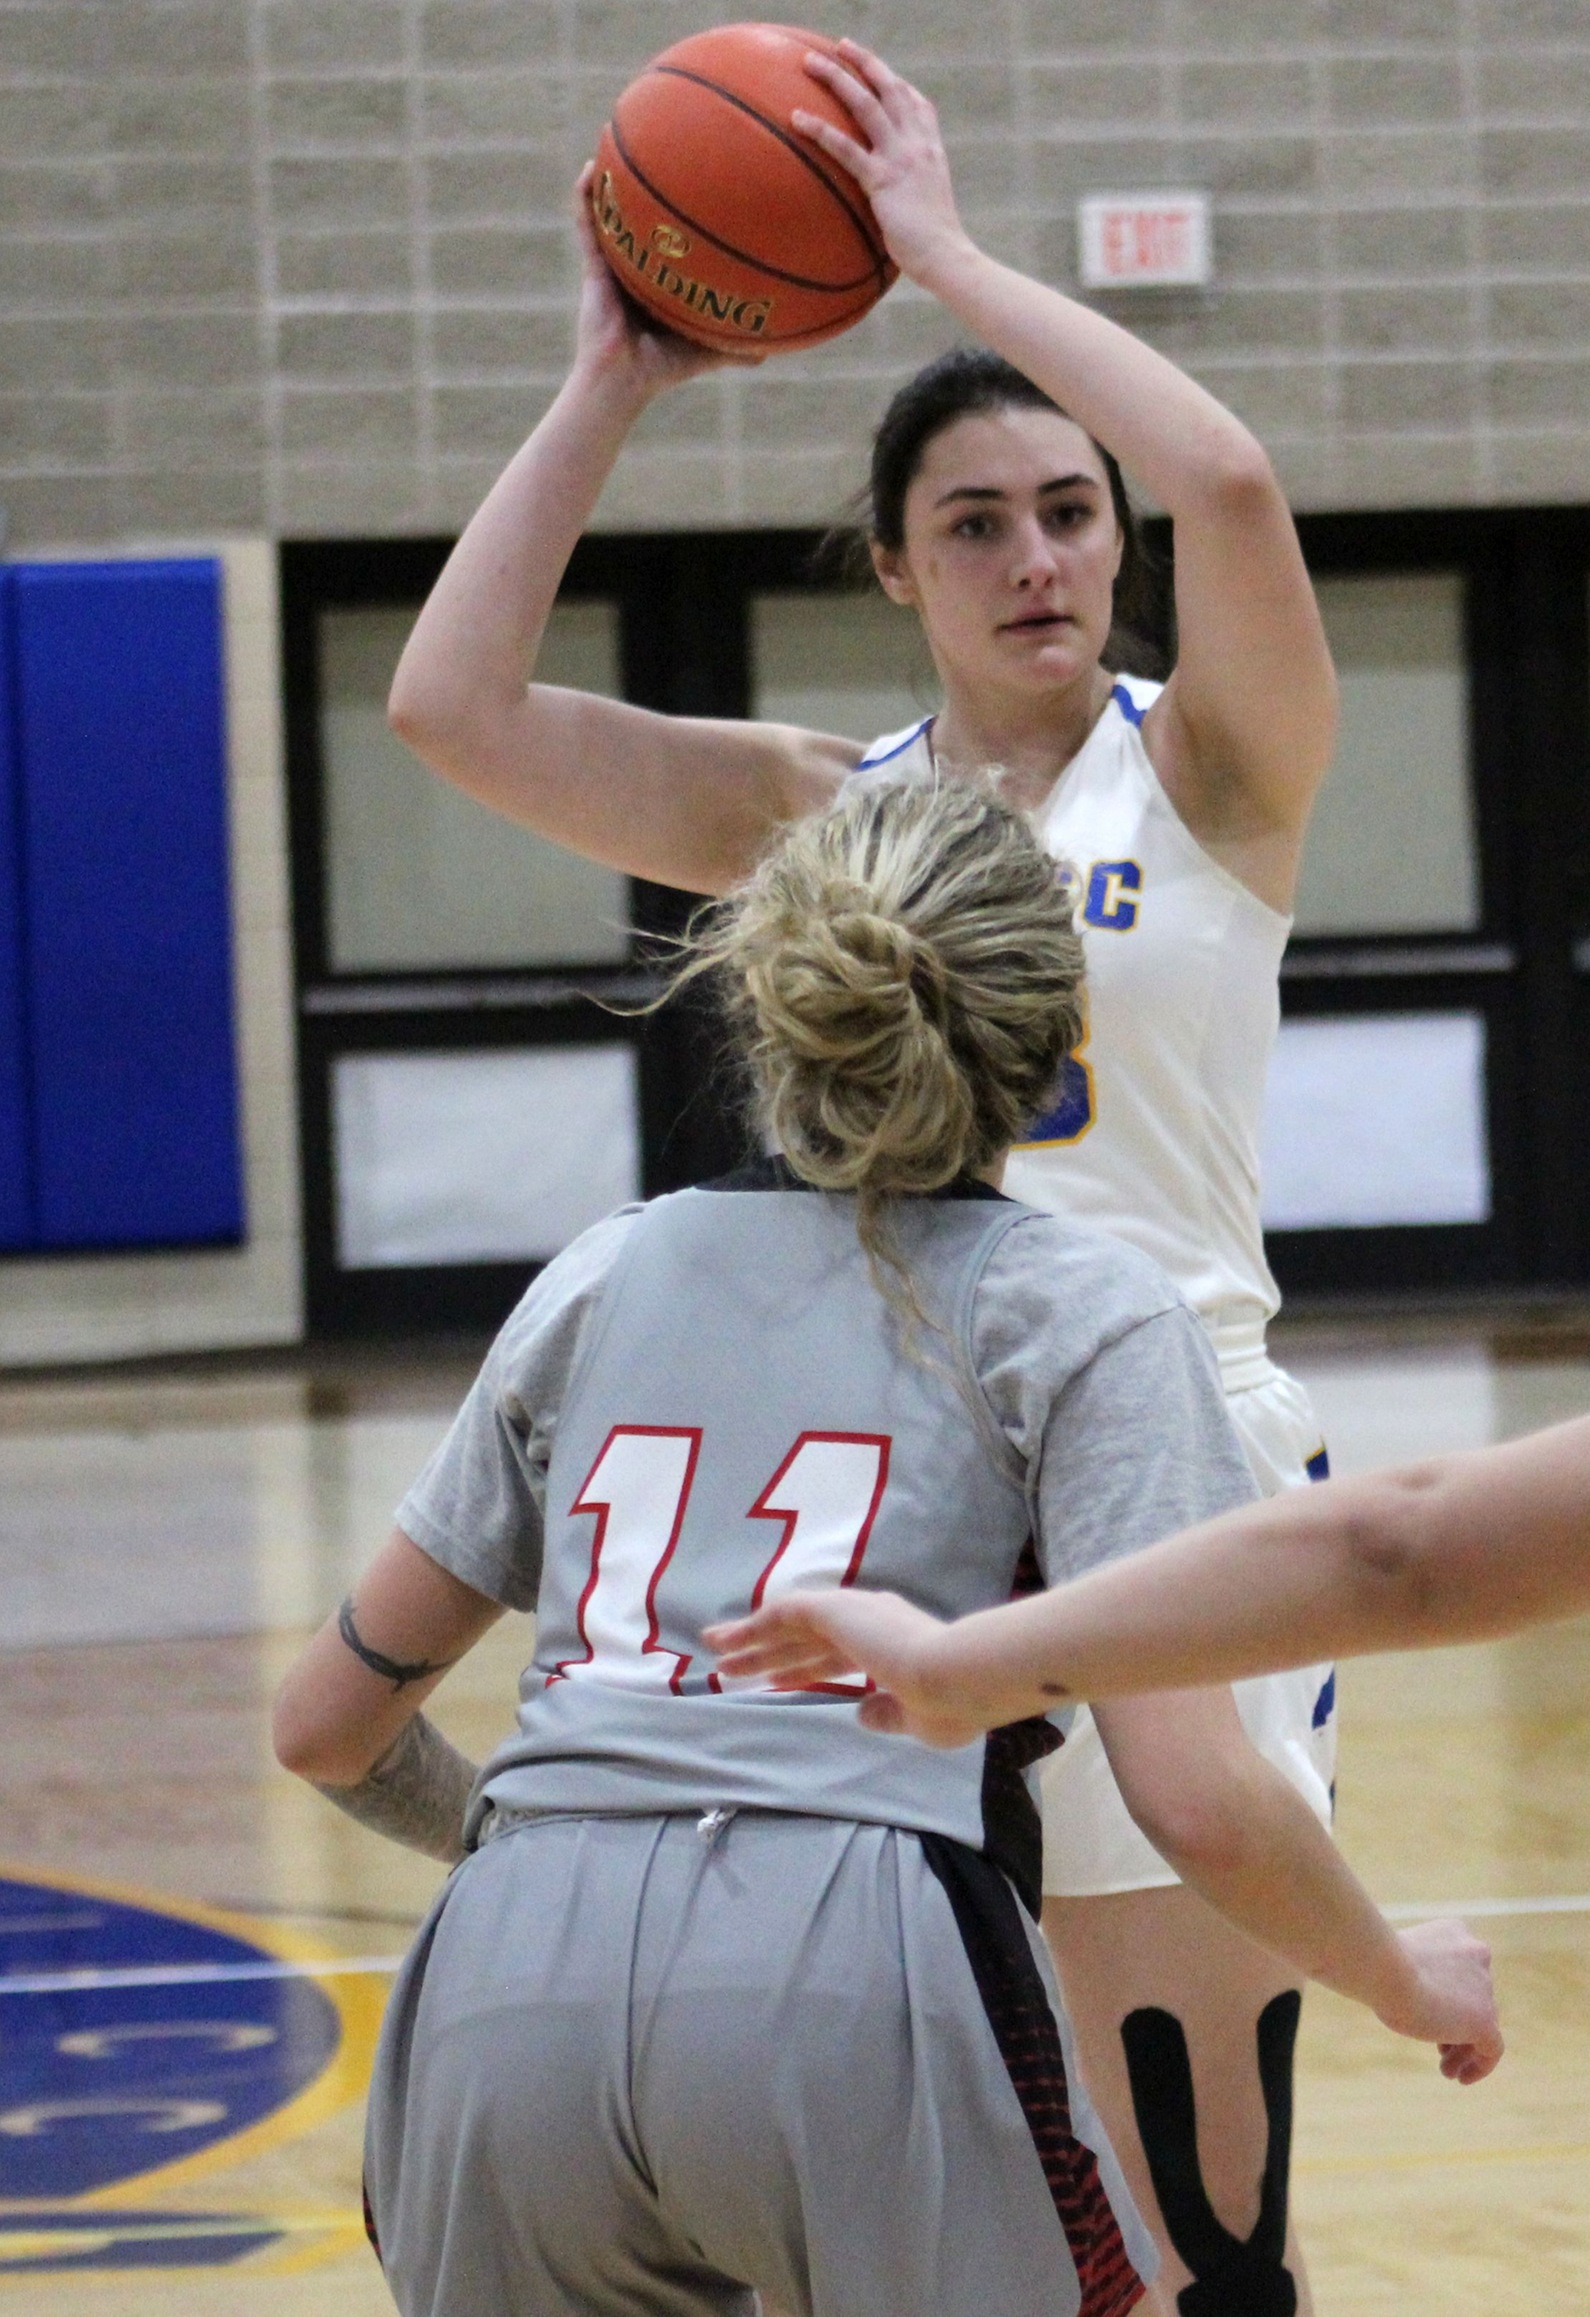 NIACC's Kayla Clewley looks to pass the ball during the second half of Wednesday's game against Southeastern.